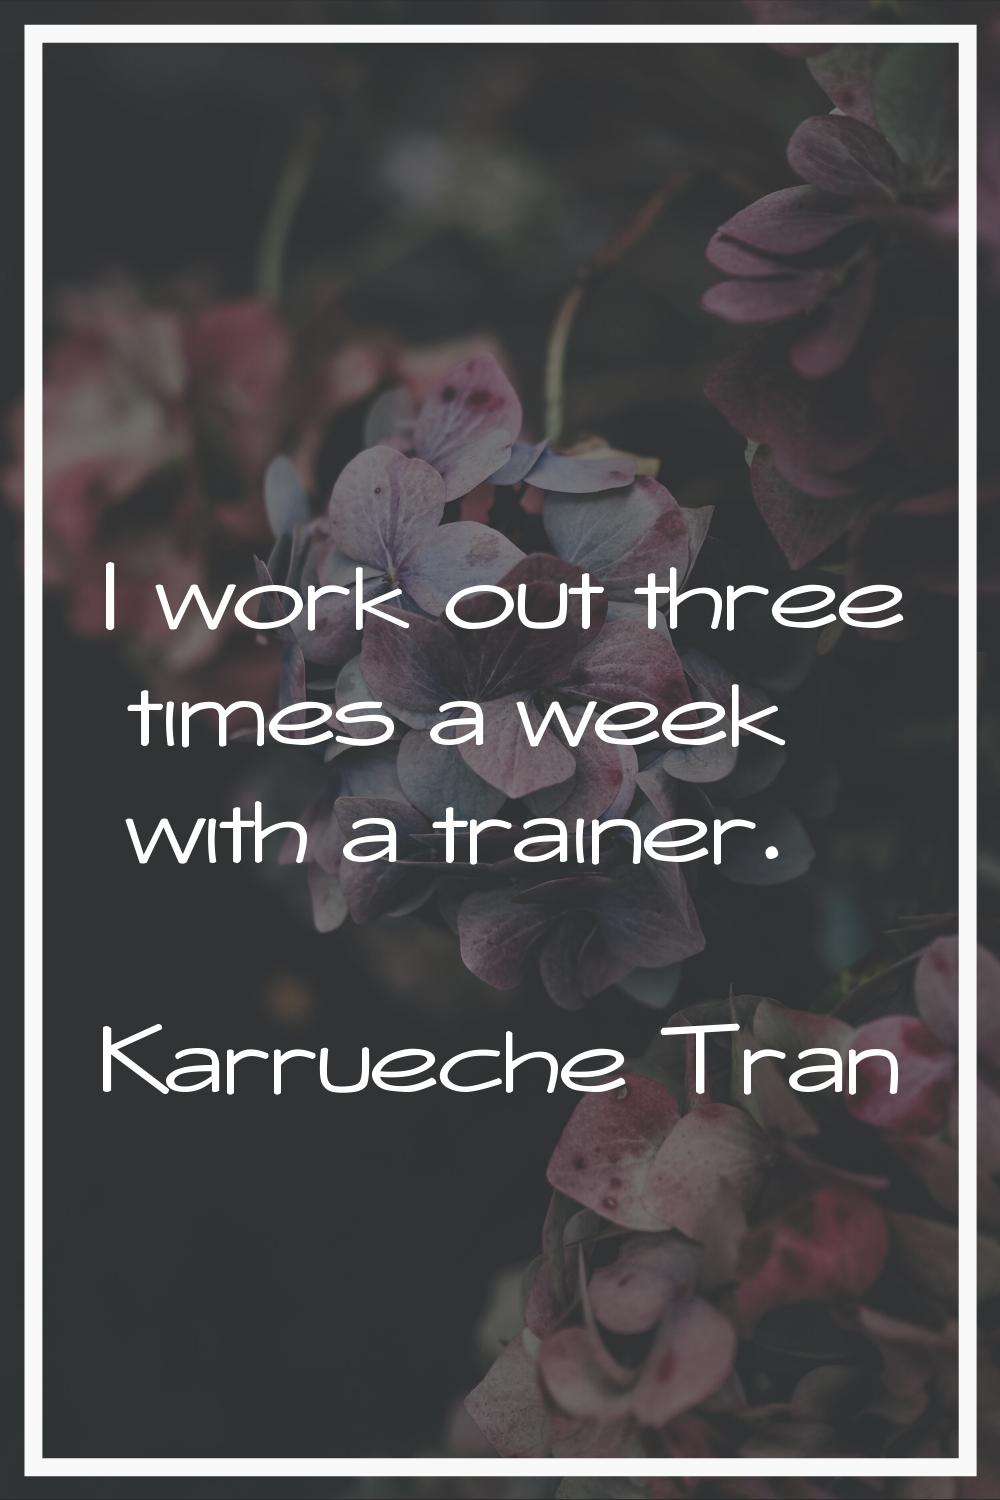 I work out three times a week with a trainer.